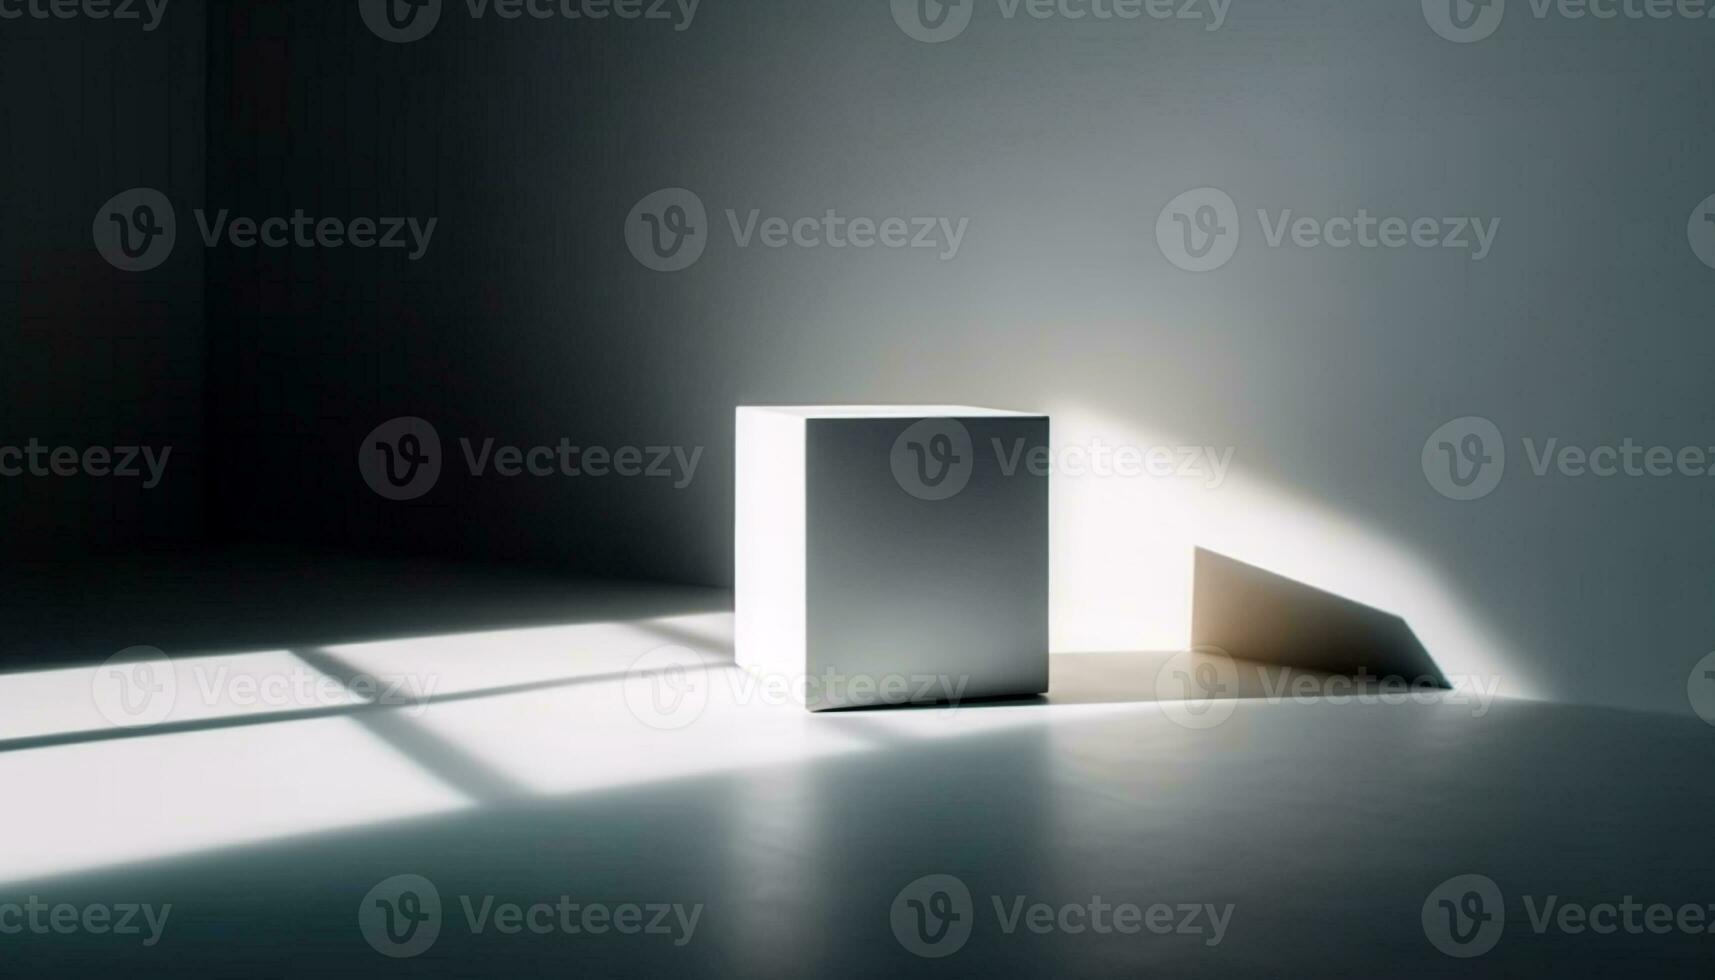 The bright spotlight illuminates the abstract pedestal in the exhibition generated by AI photo